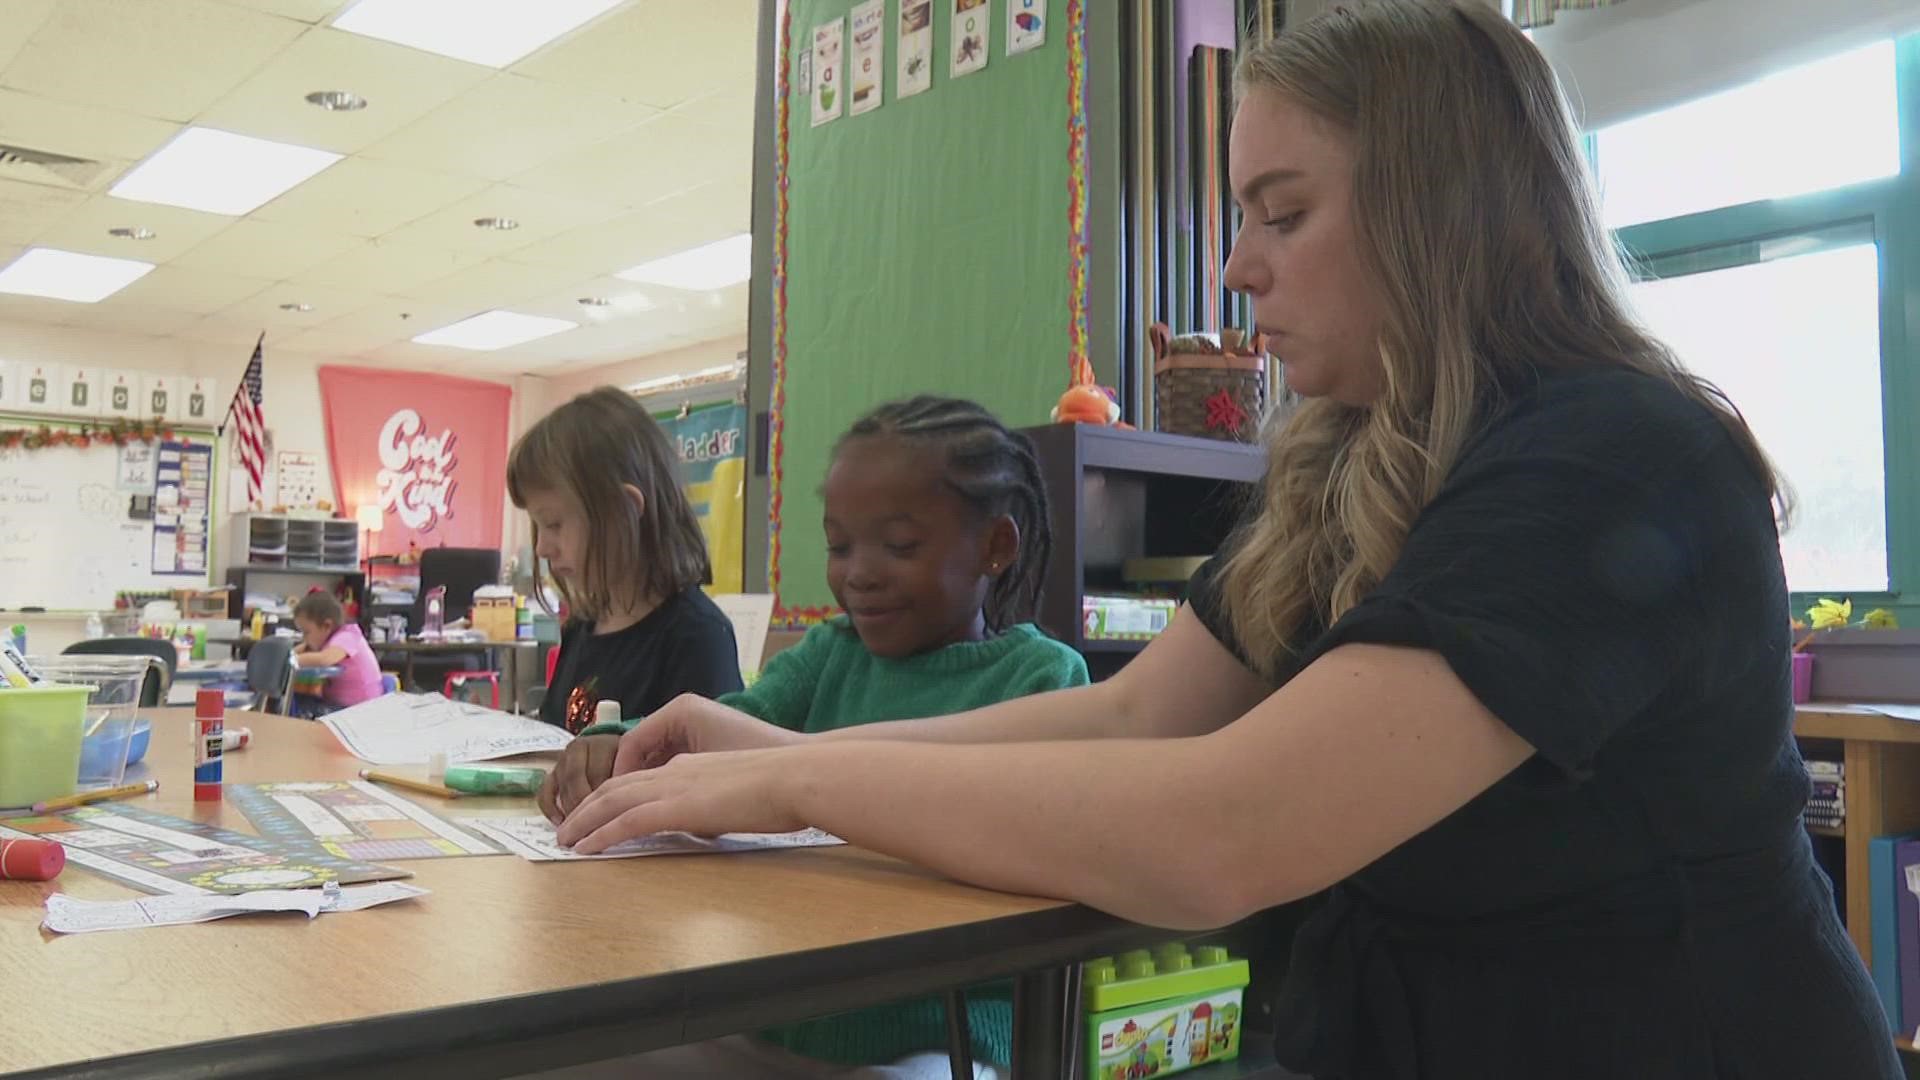 Five out of seven UMaine schools are taking part in a Resident Teacher Program to help fill open teacher positions across the state.